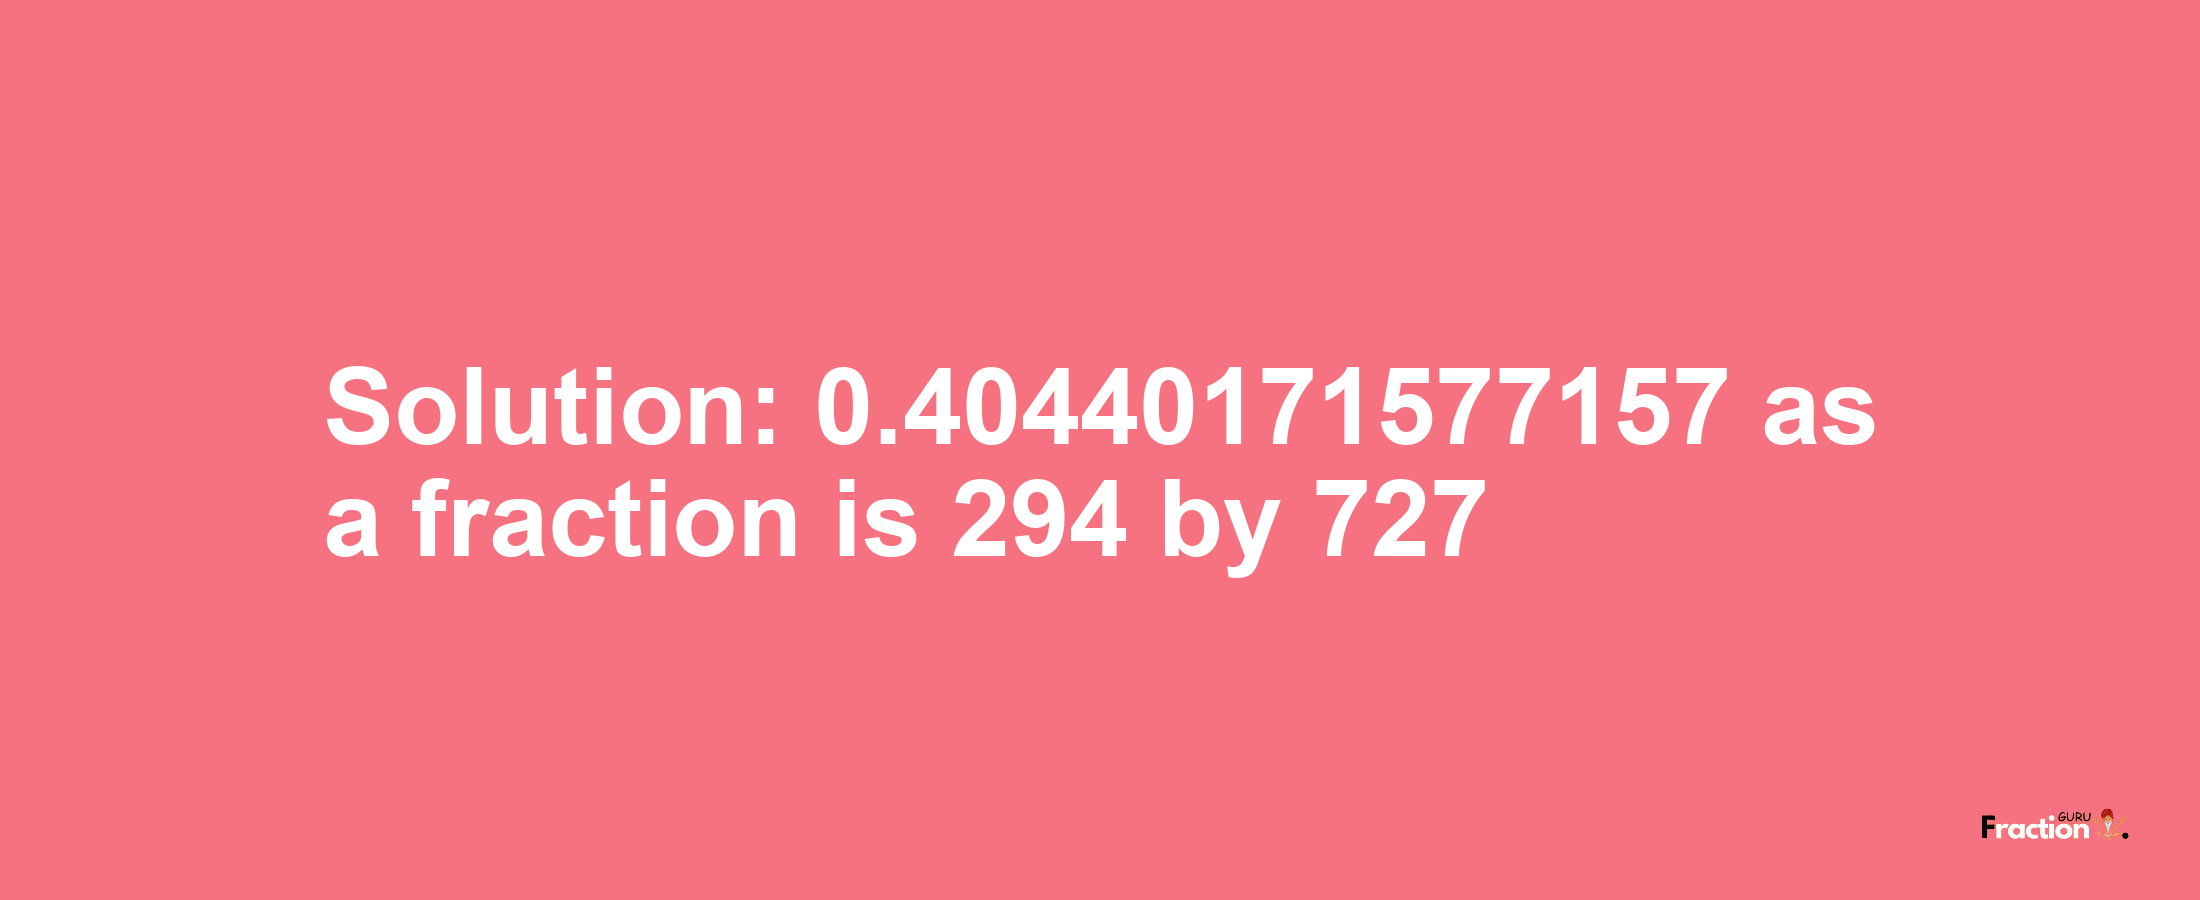 Solution:0.40440171577157 as a fraction is 294/727